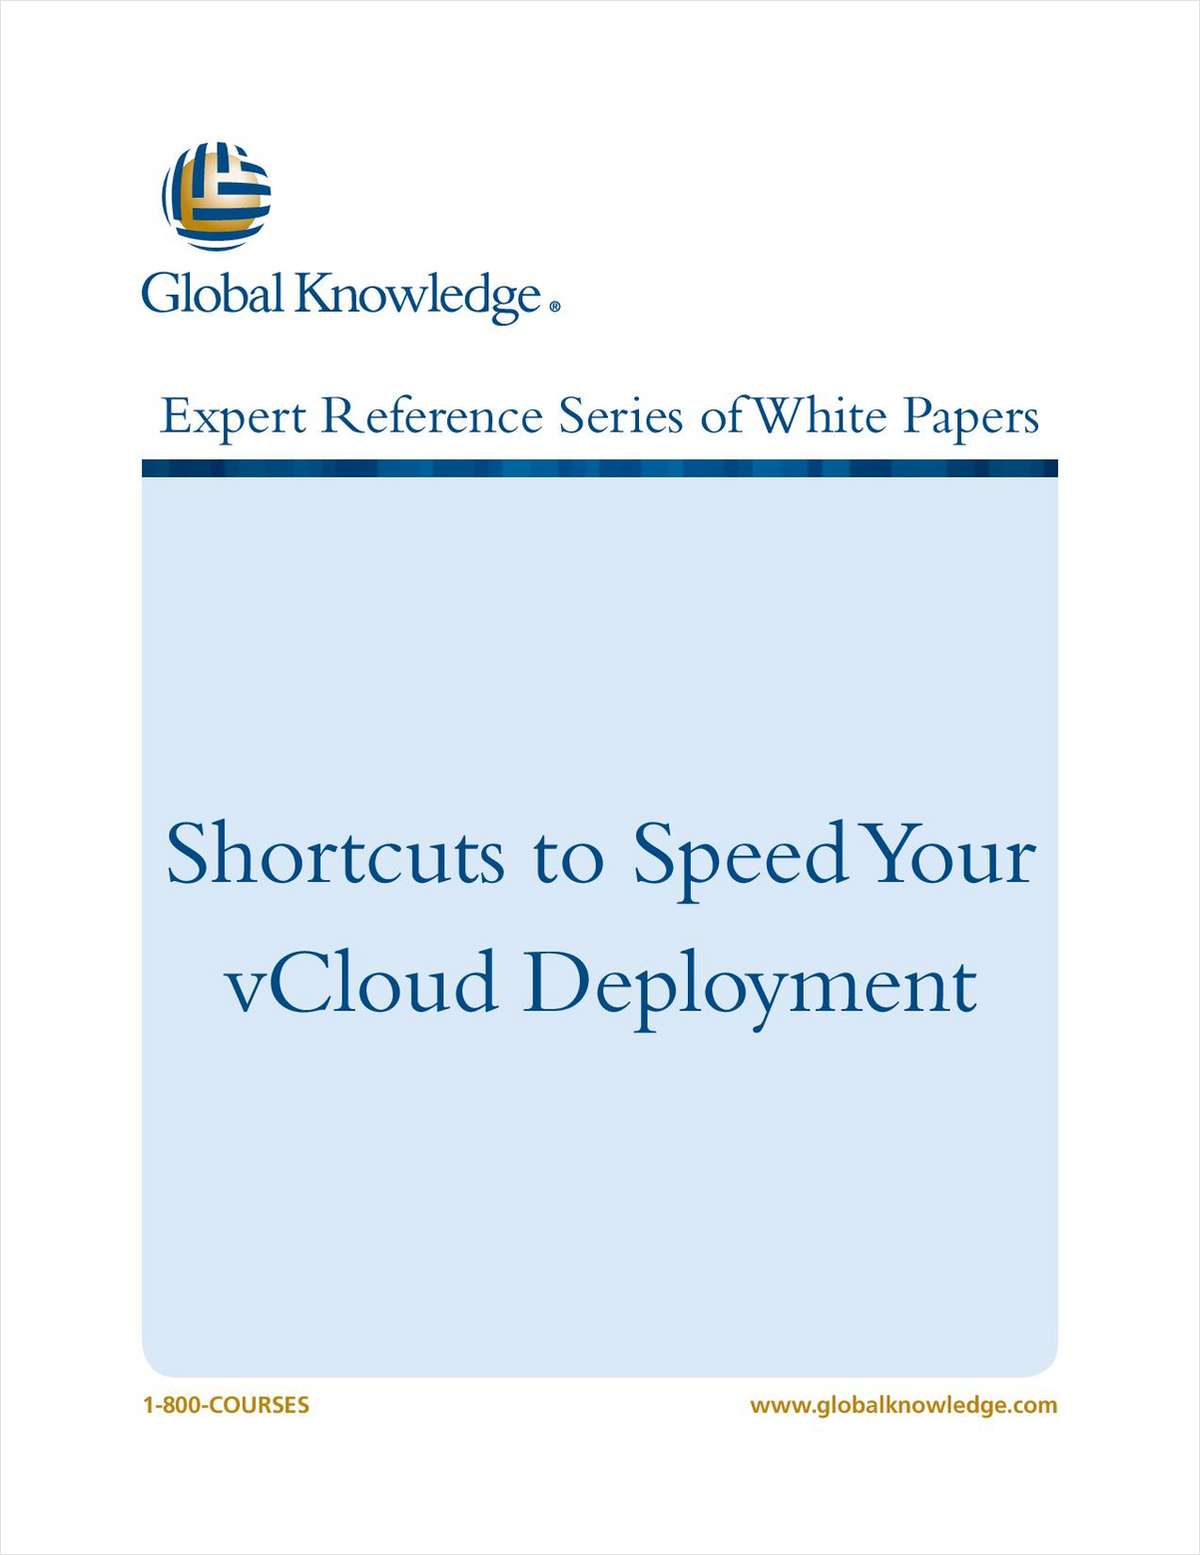 Shortcuts to Speed Your vCloud Deployment